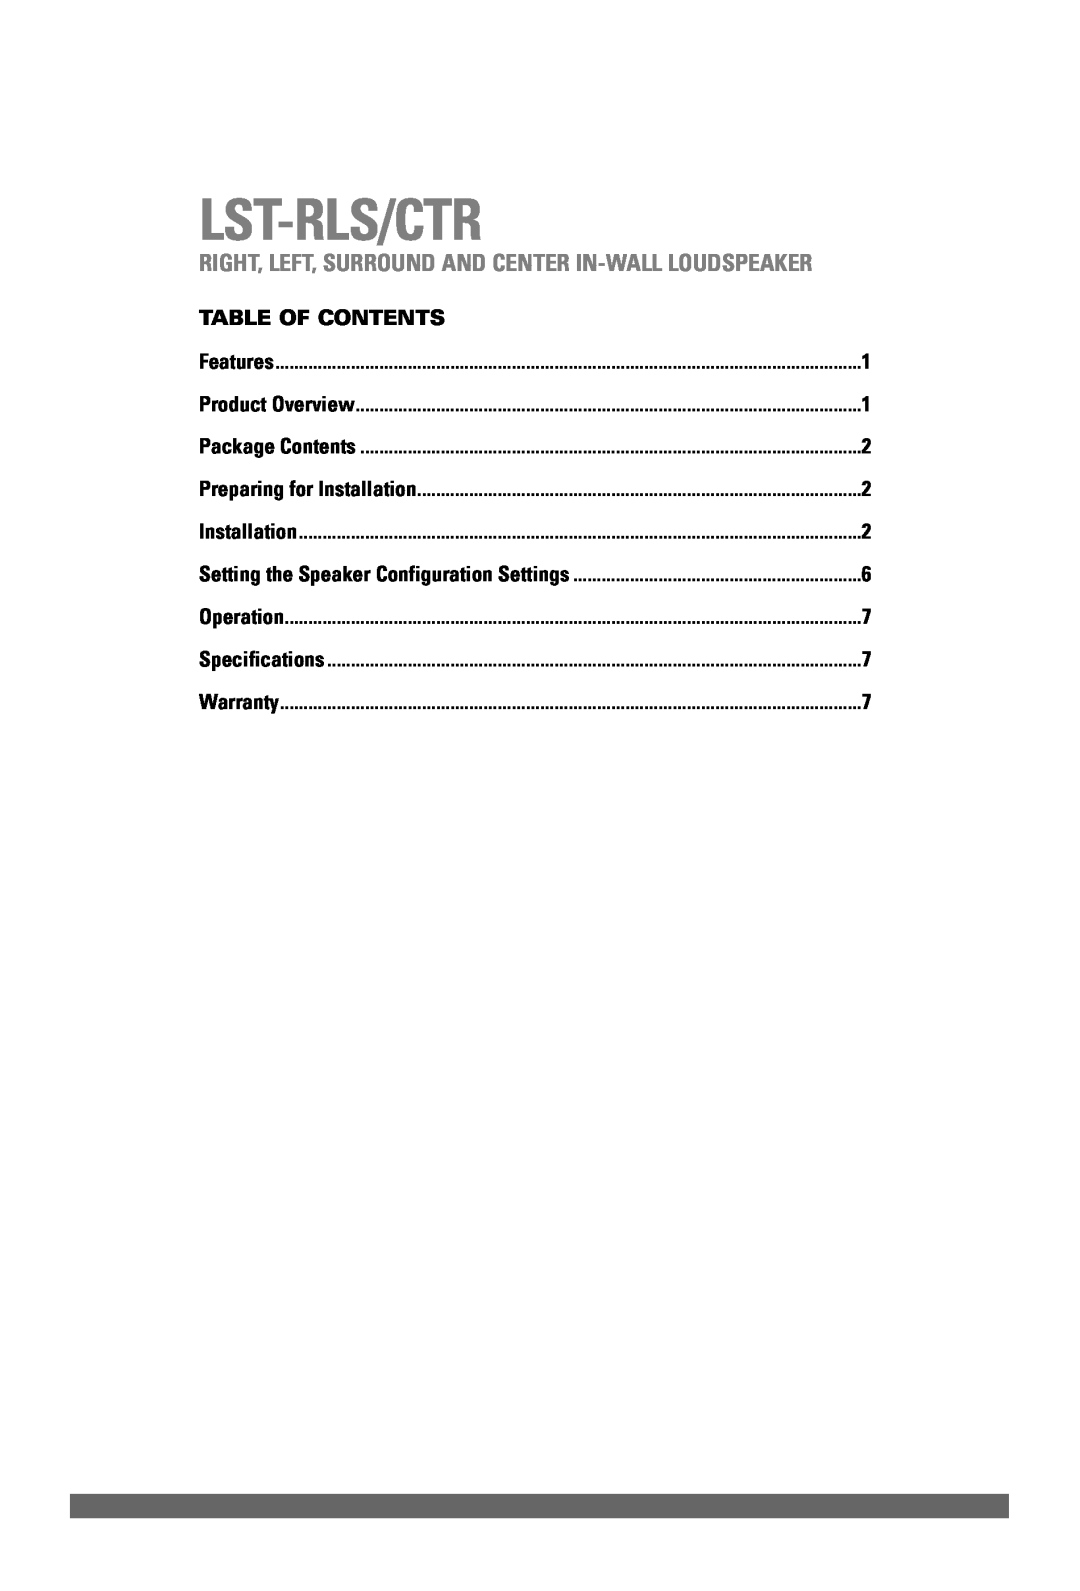 JobSite Systems LST-RLS Table Of Contents, Lst-Rls/Ctr, Setting the Speaker Configuration Settings, Features, Installation 